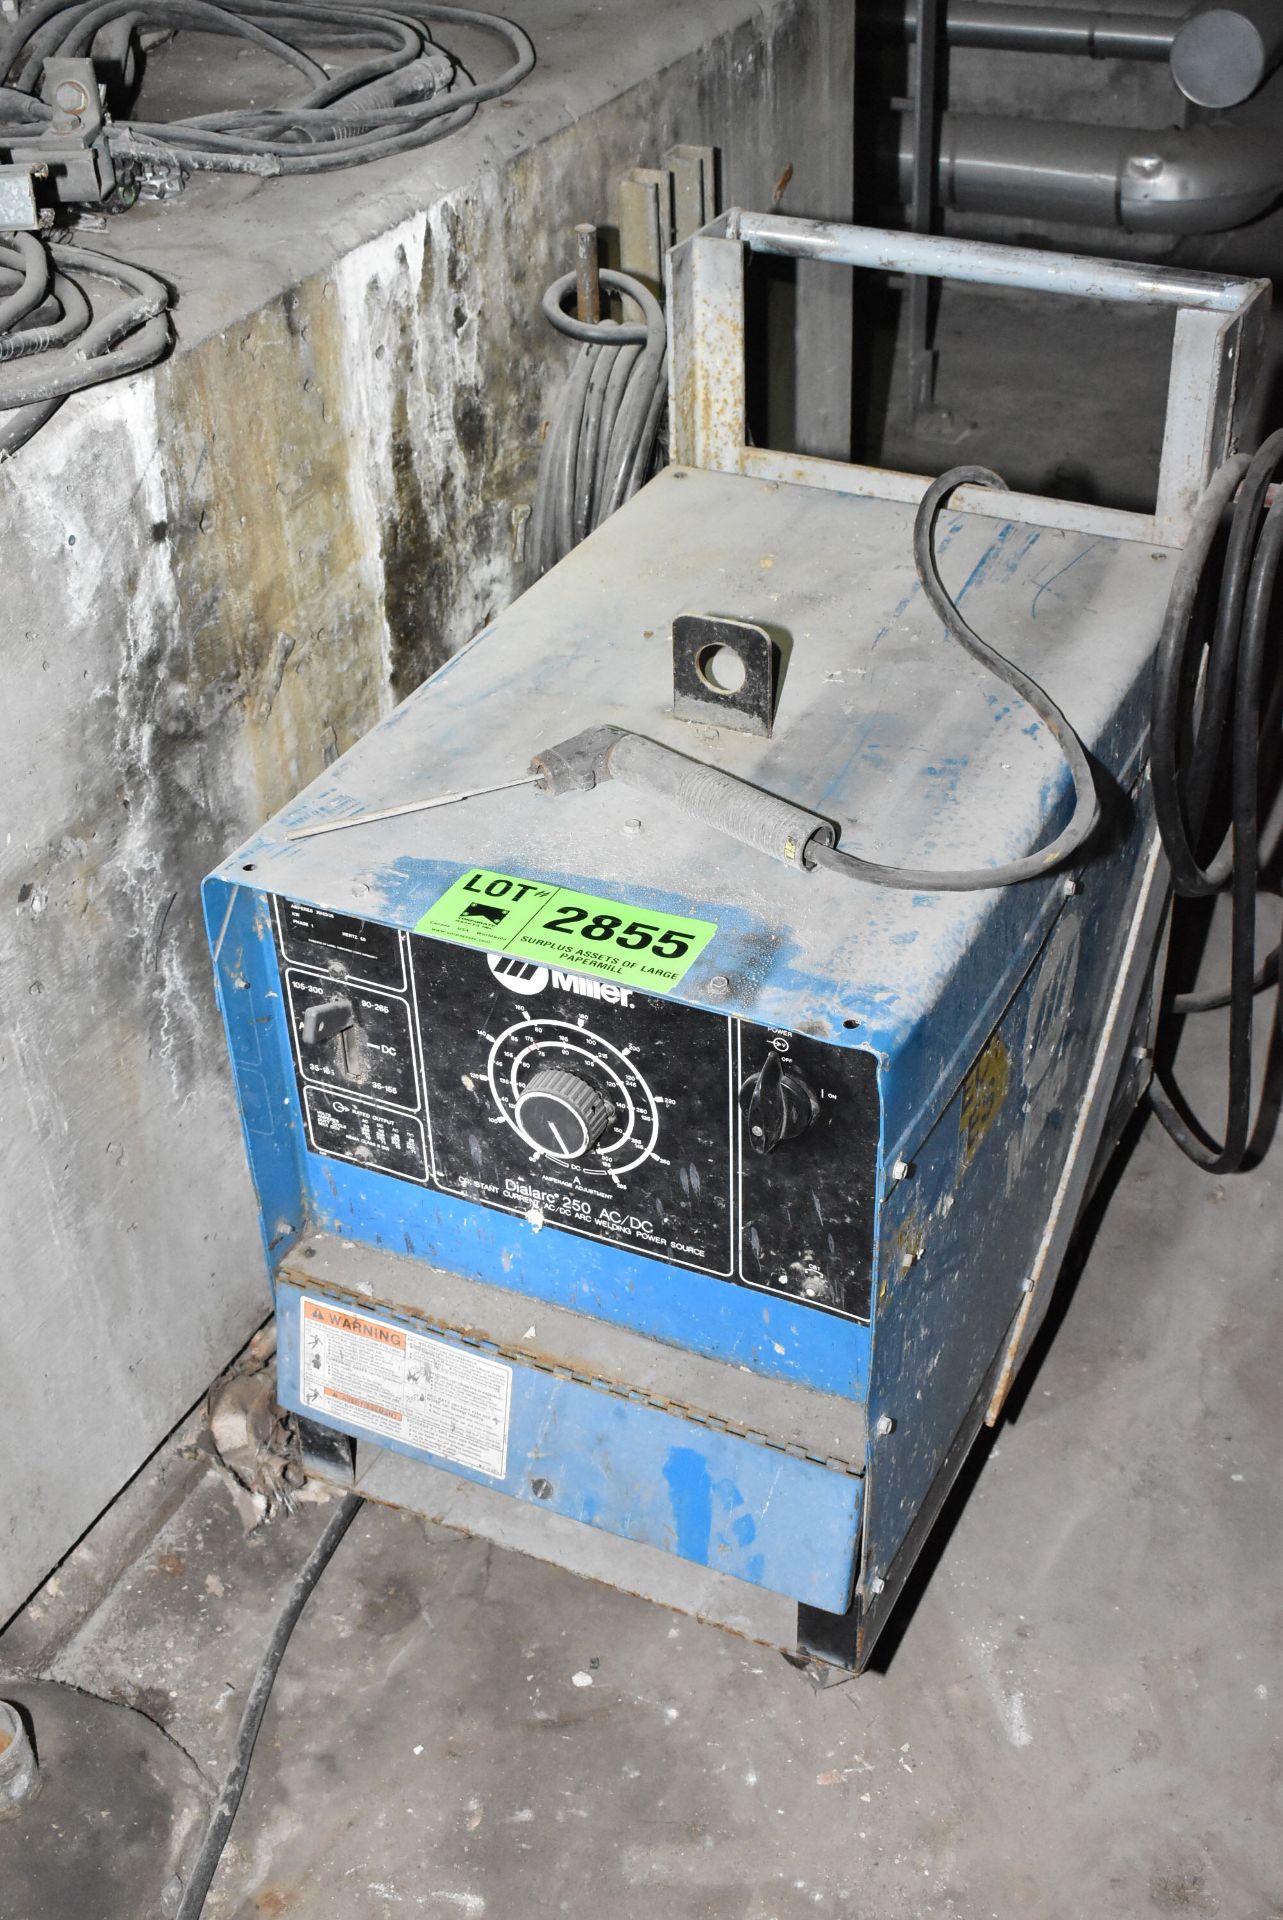 MILLER DIALARC 250 AC/DC STICK WELDER WITH CABLES & GUN, S/N: N/A [RIGGING FEE FOR LOT #2855 - $50